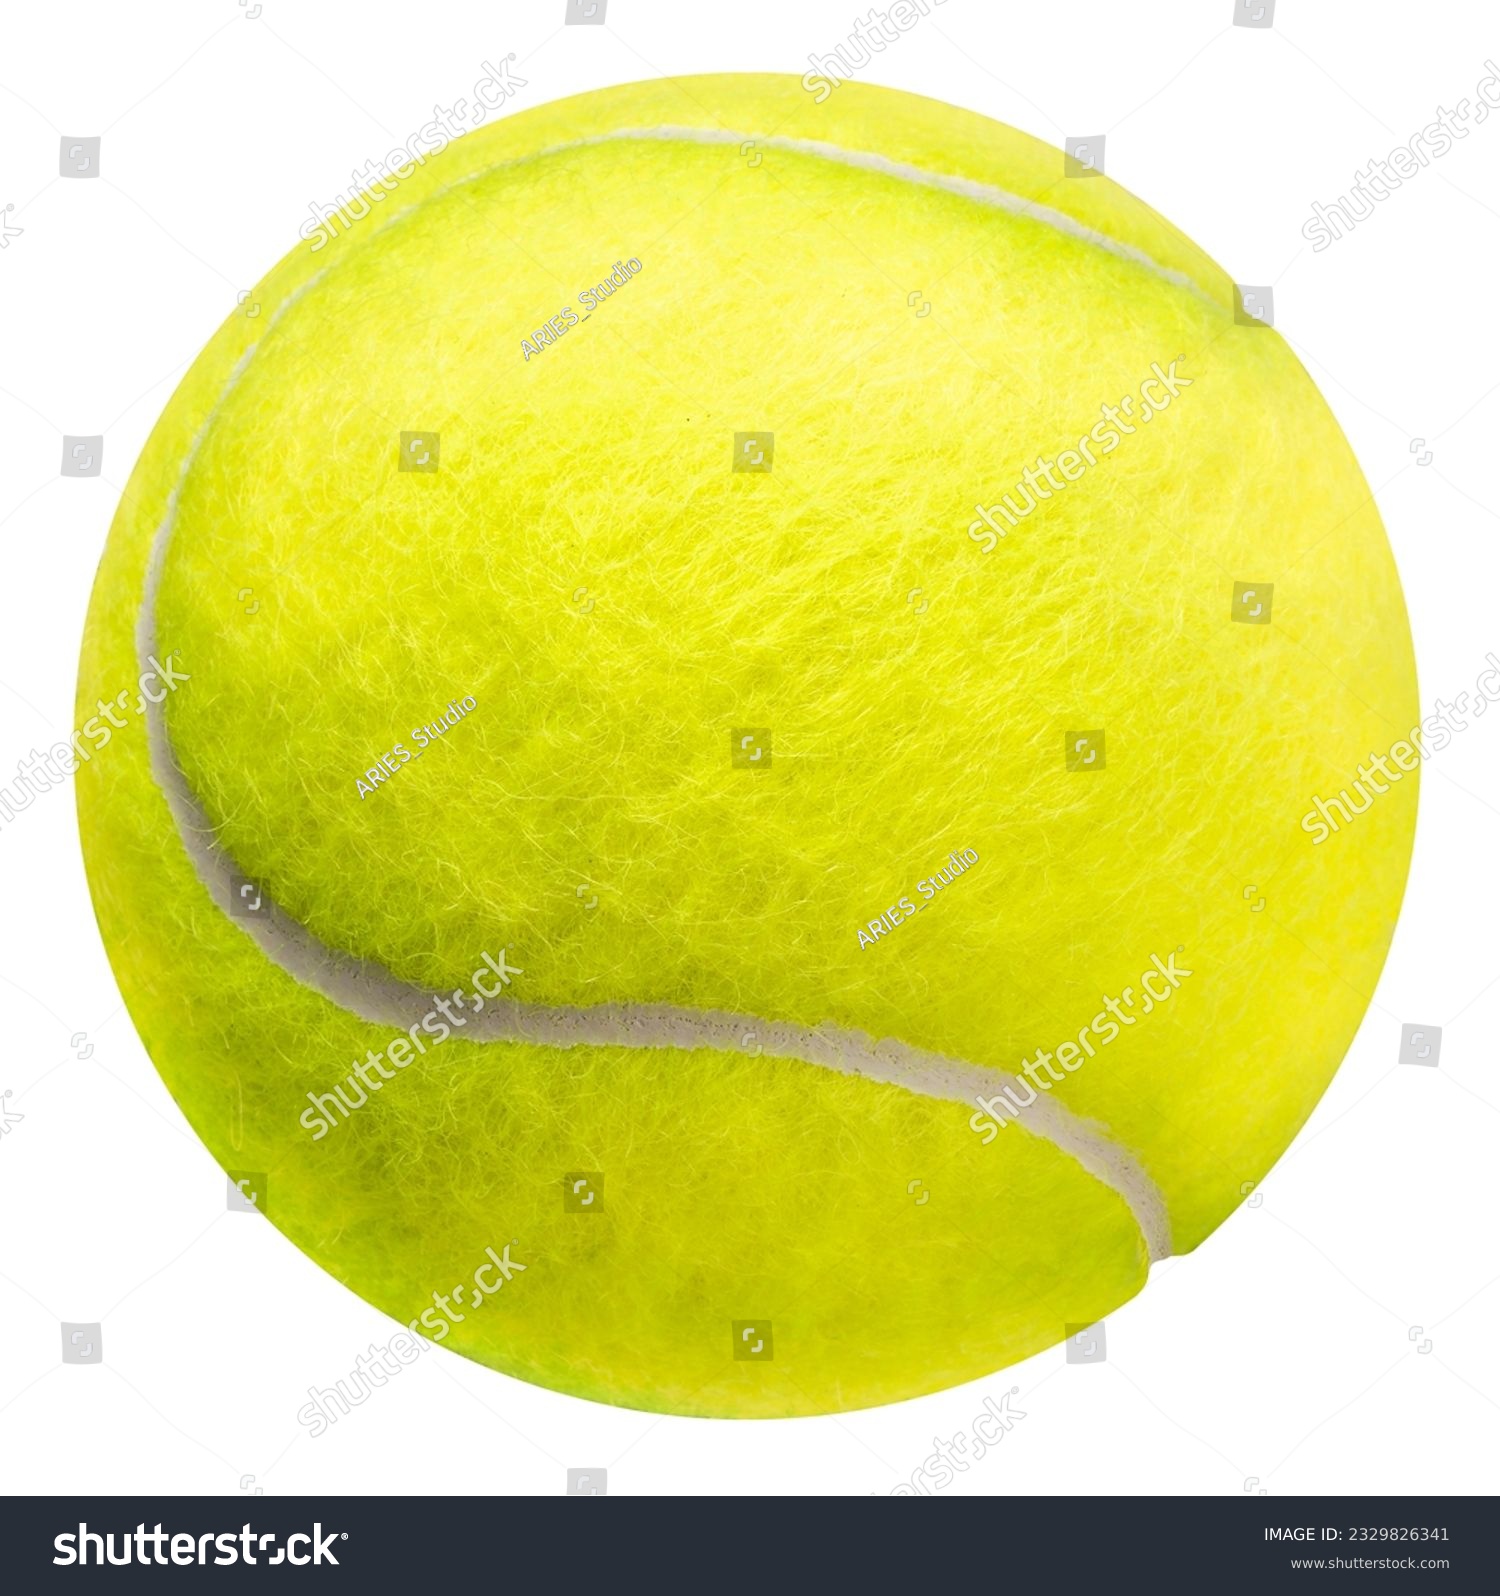 Yellow Tennis ball sports equipment on white With work path. #2329826341